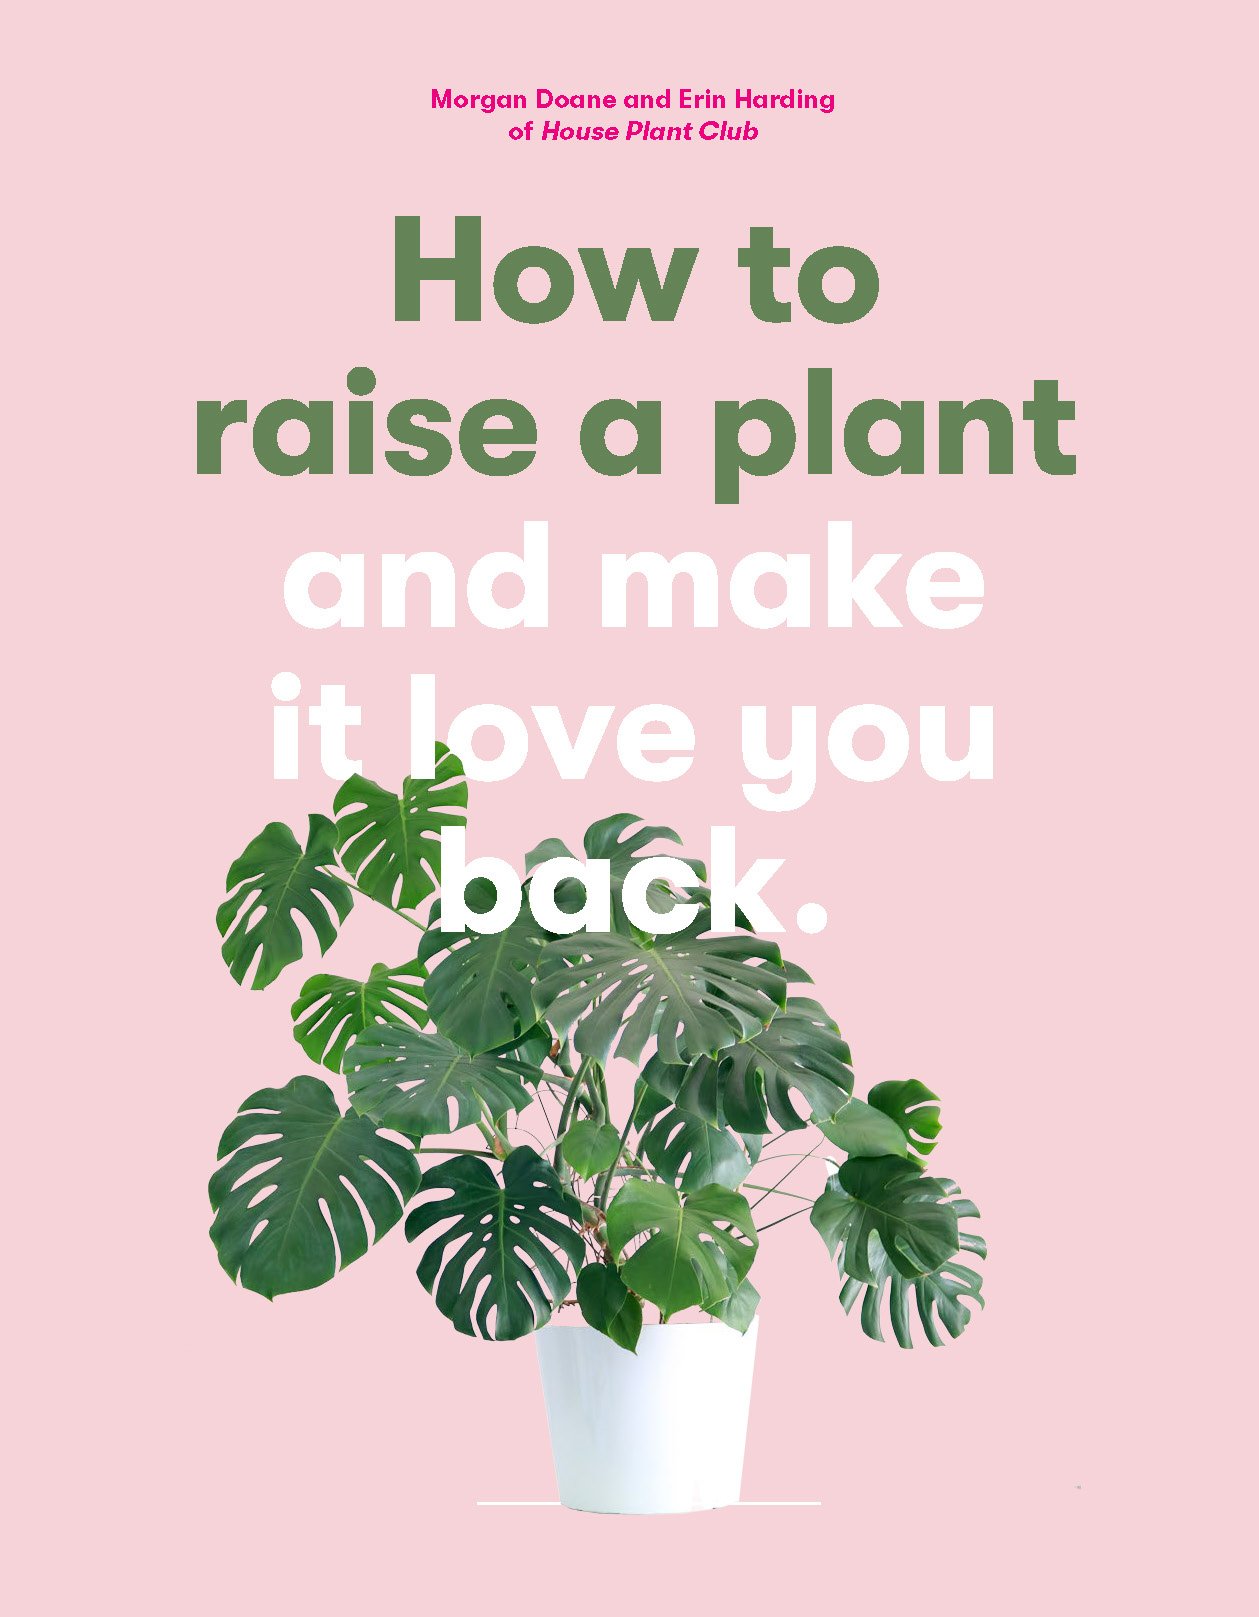 So excited to share!! How to Raise a Plant and Make it Love You Back